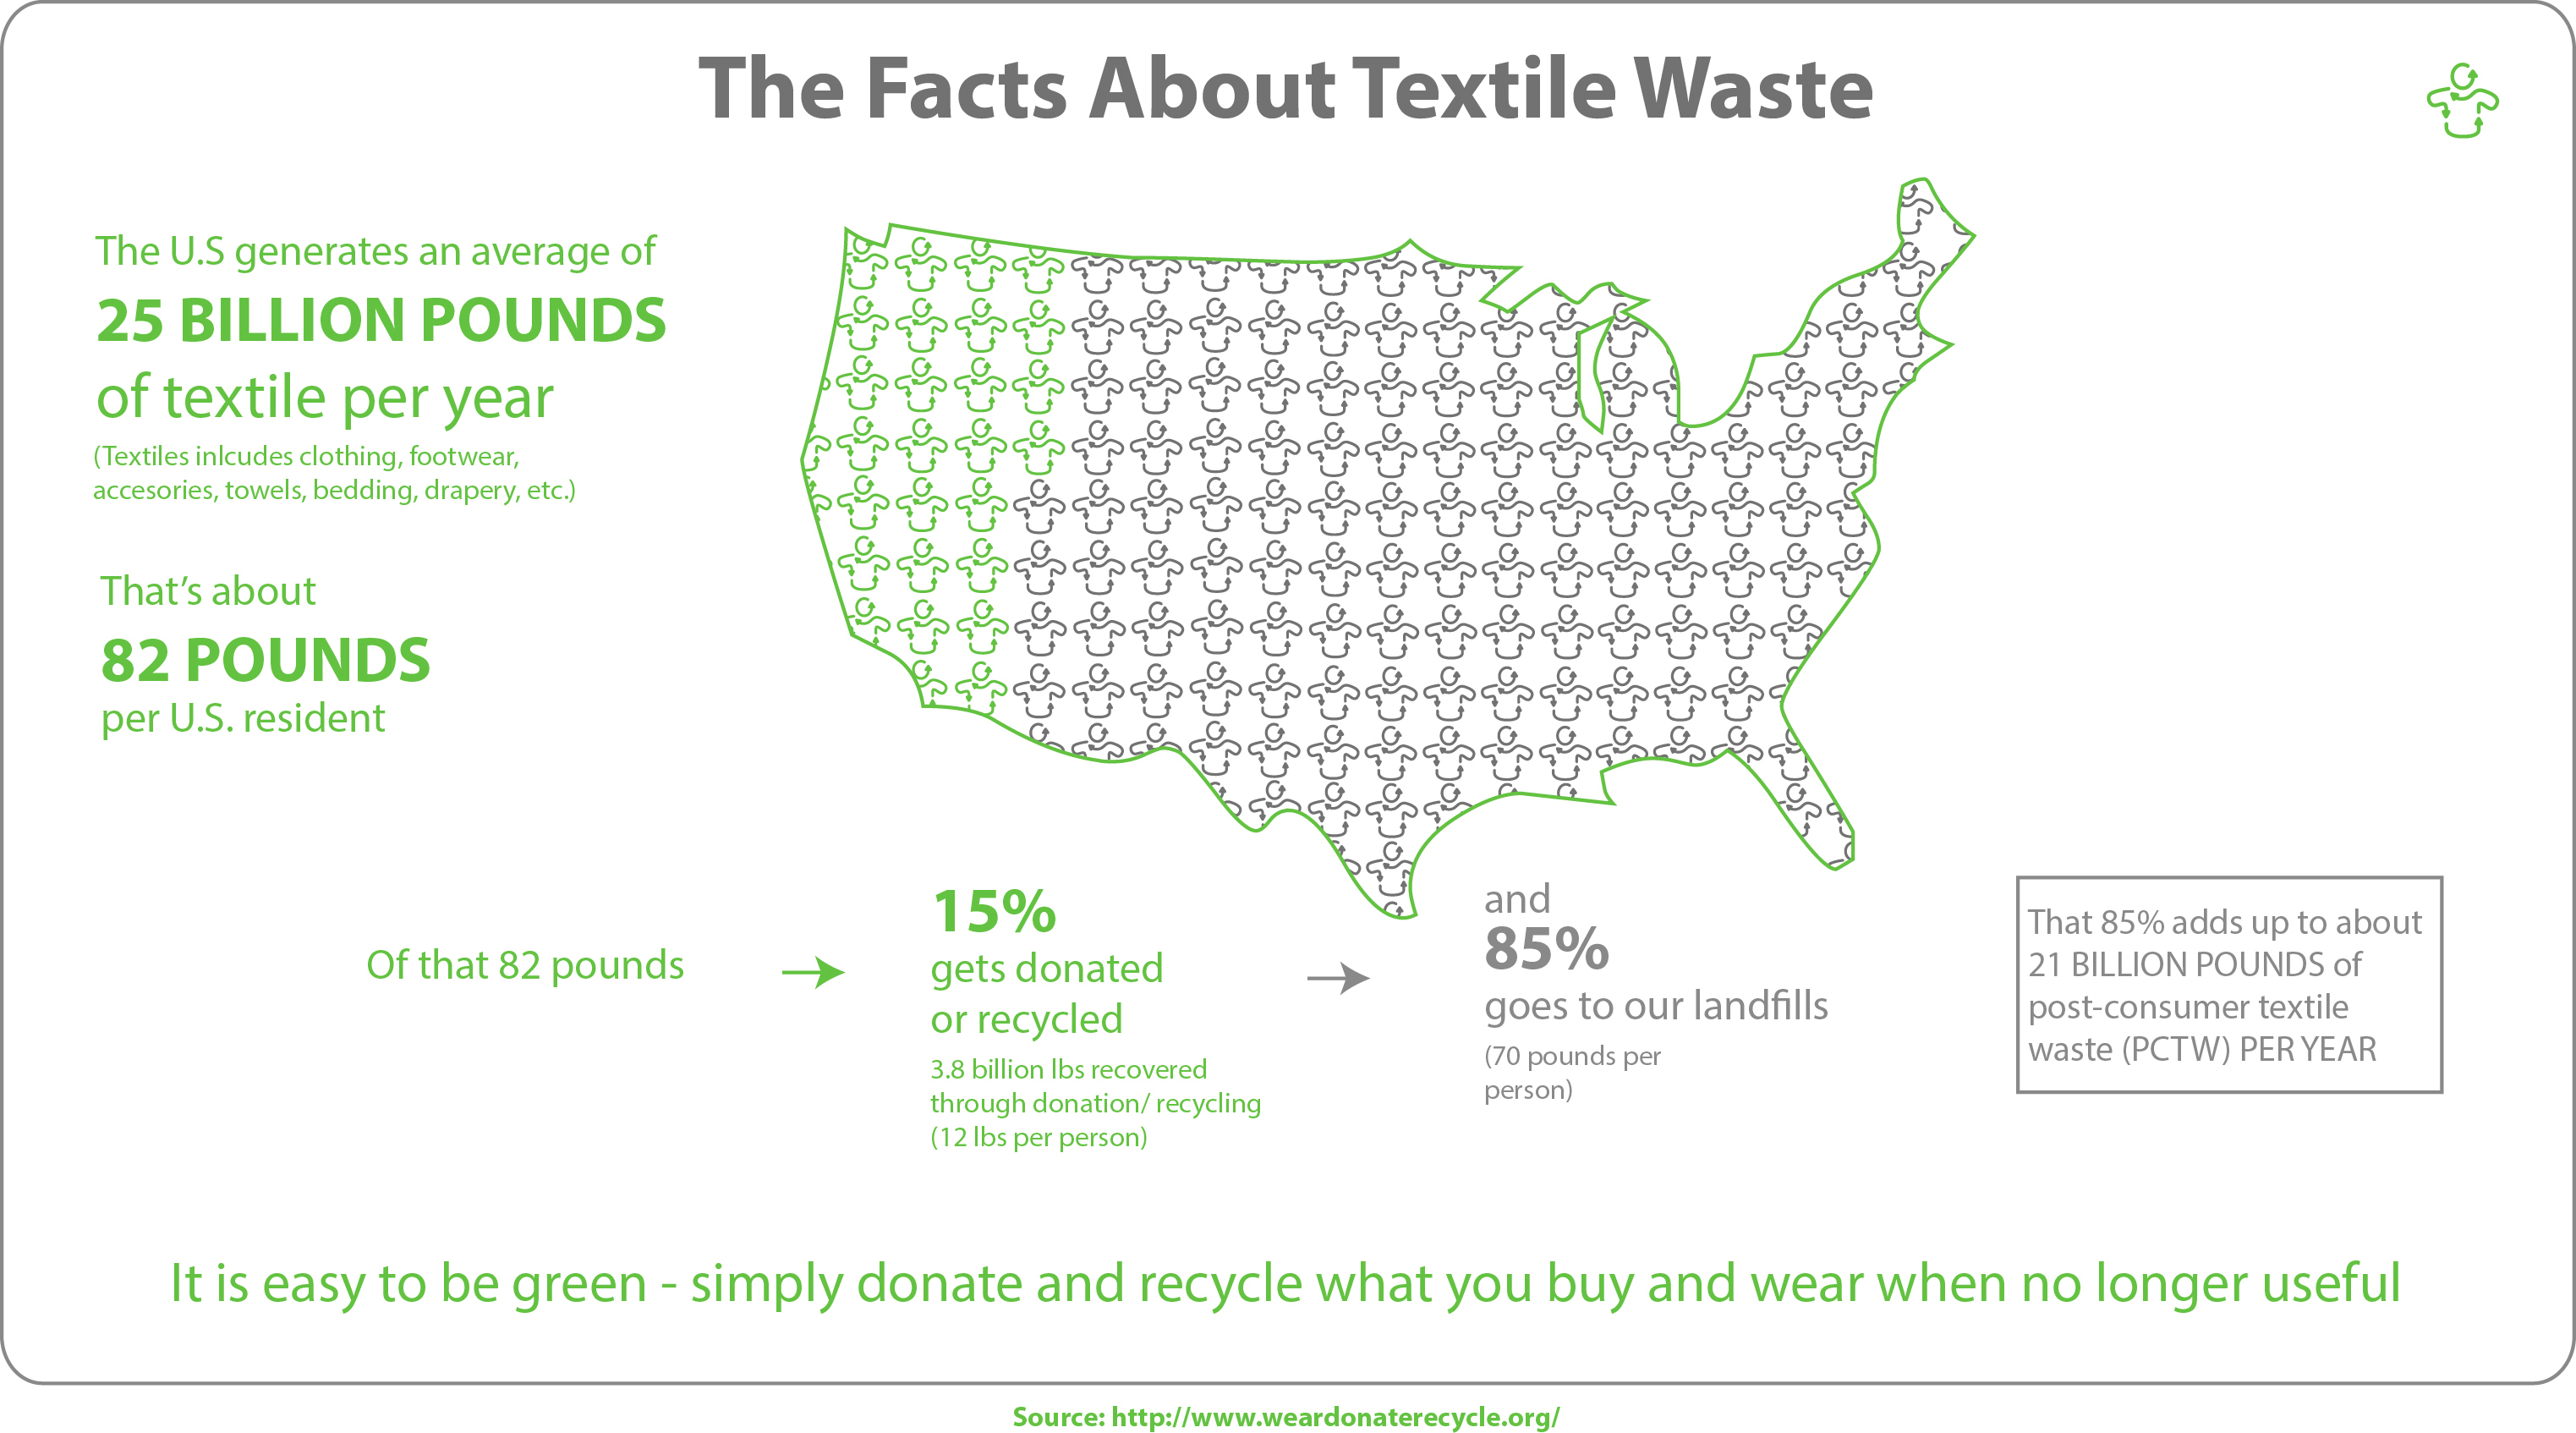 Since the mid 1940's US charities and the post-consumer textile recycling industry have repurposed and recycled billions of pounds of clothing, household textiles, shoes, and accessories. This ensures your old clothing, footwear, and textiles continue to add value to the U.S. economy and beyond.